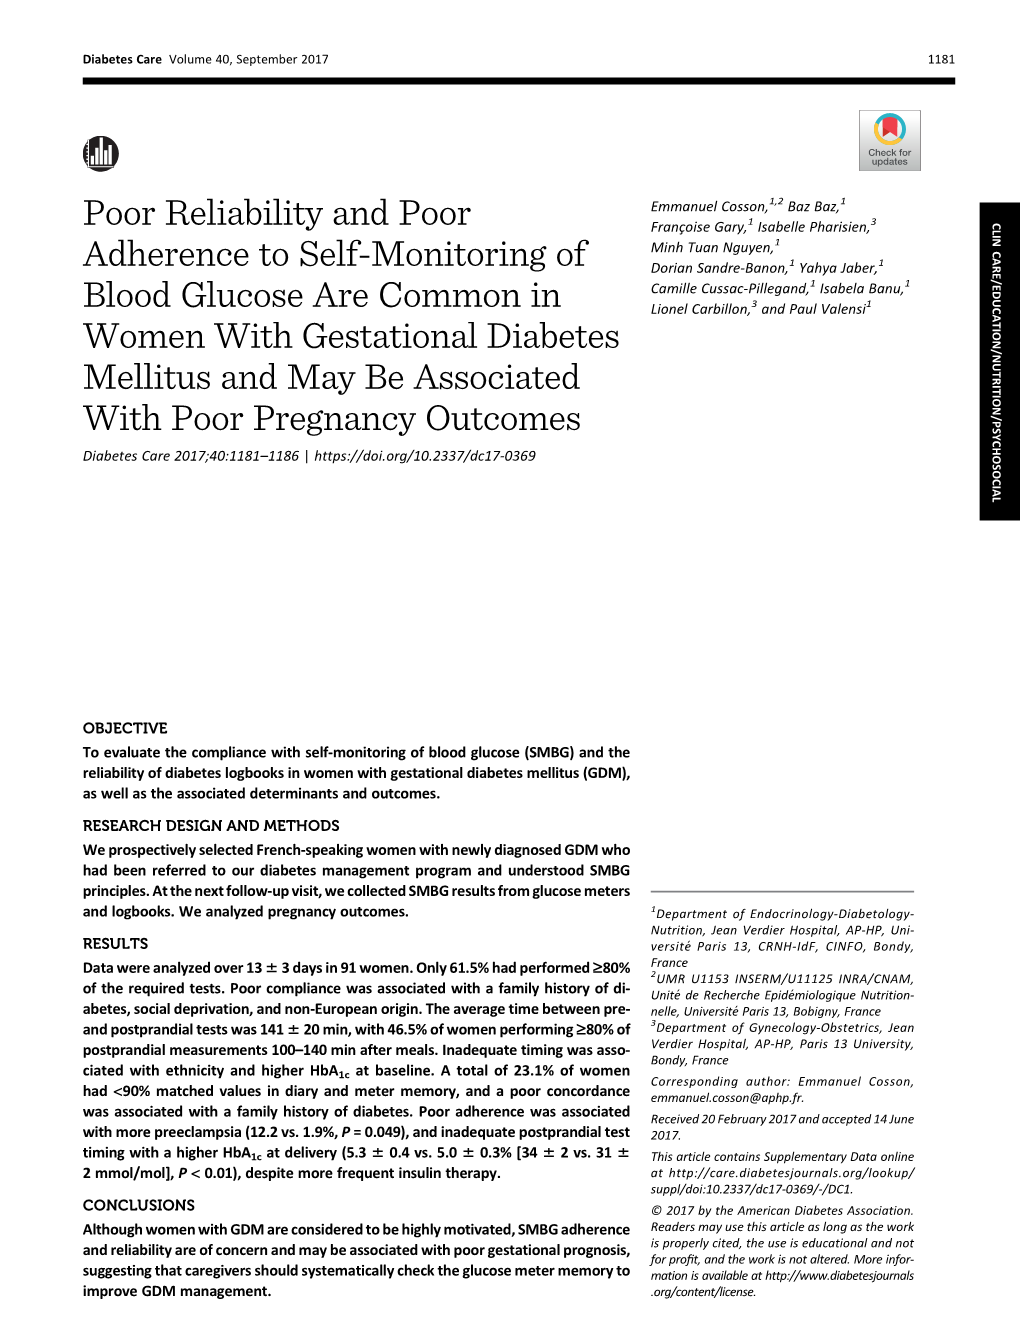 Poor Reliability and Poor Adherence to Self-Monitoring of Blood Glucose